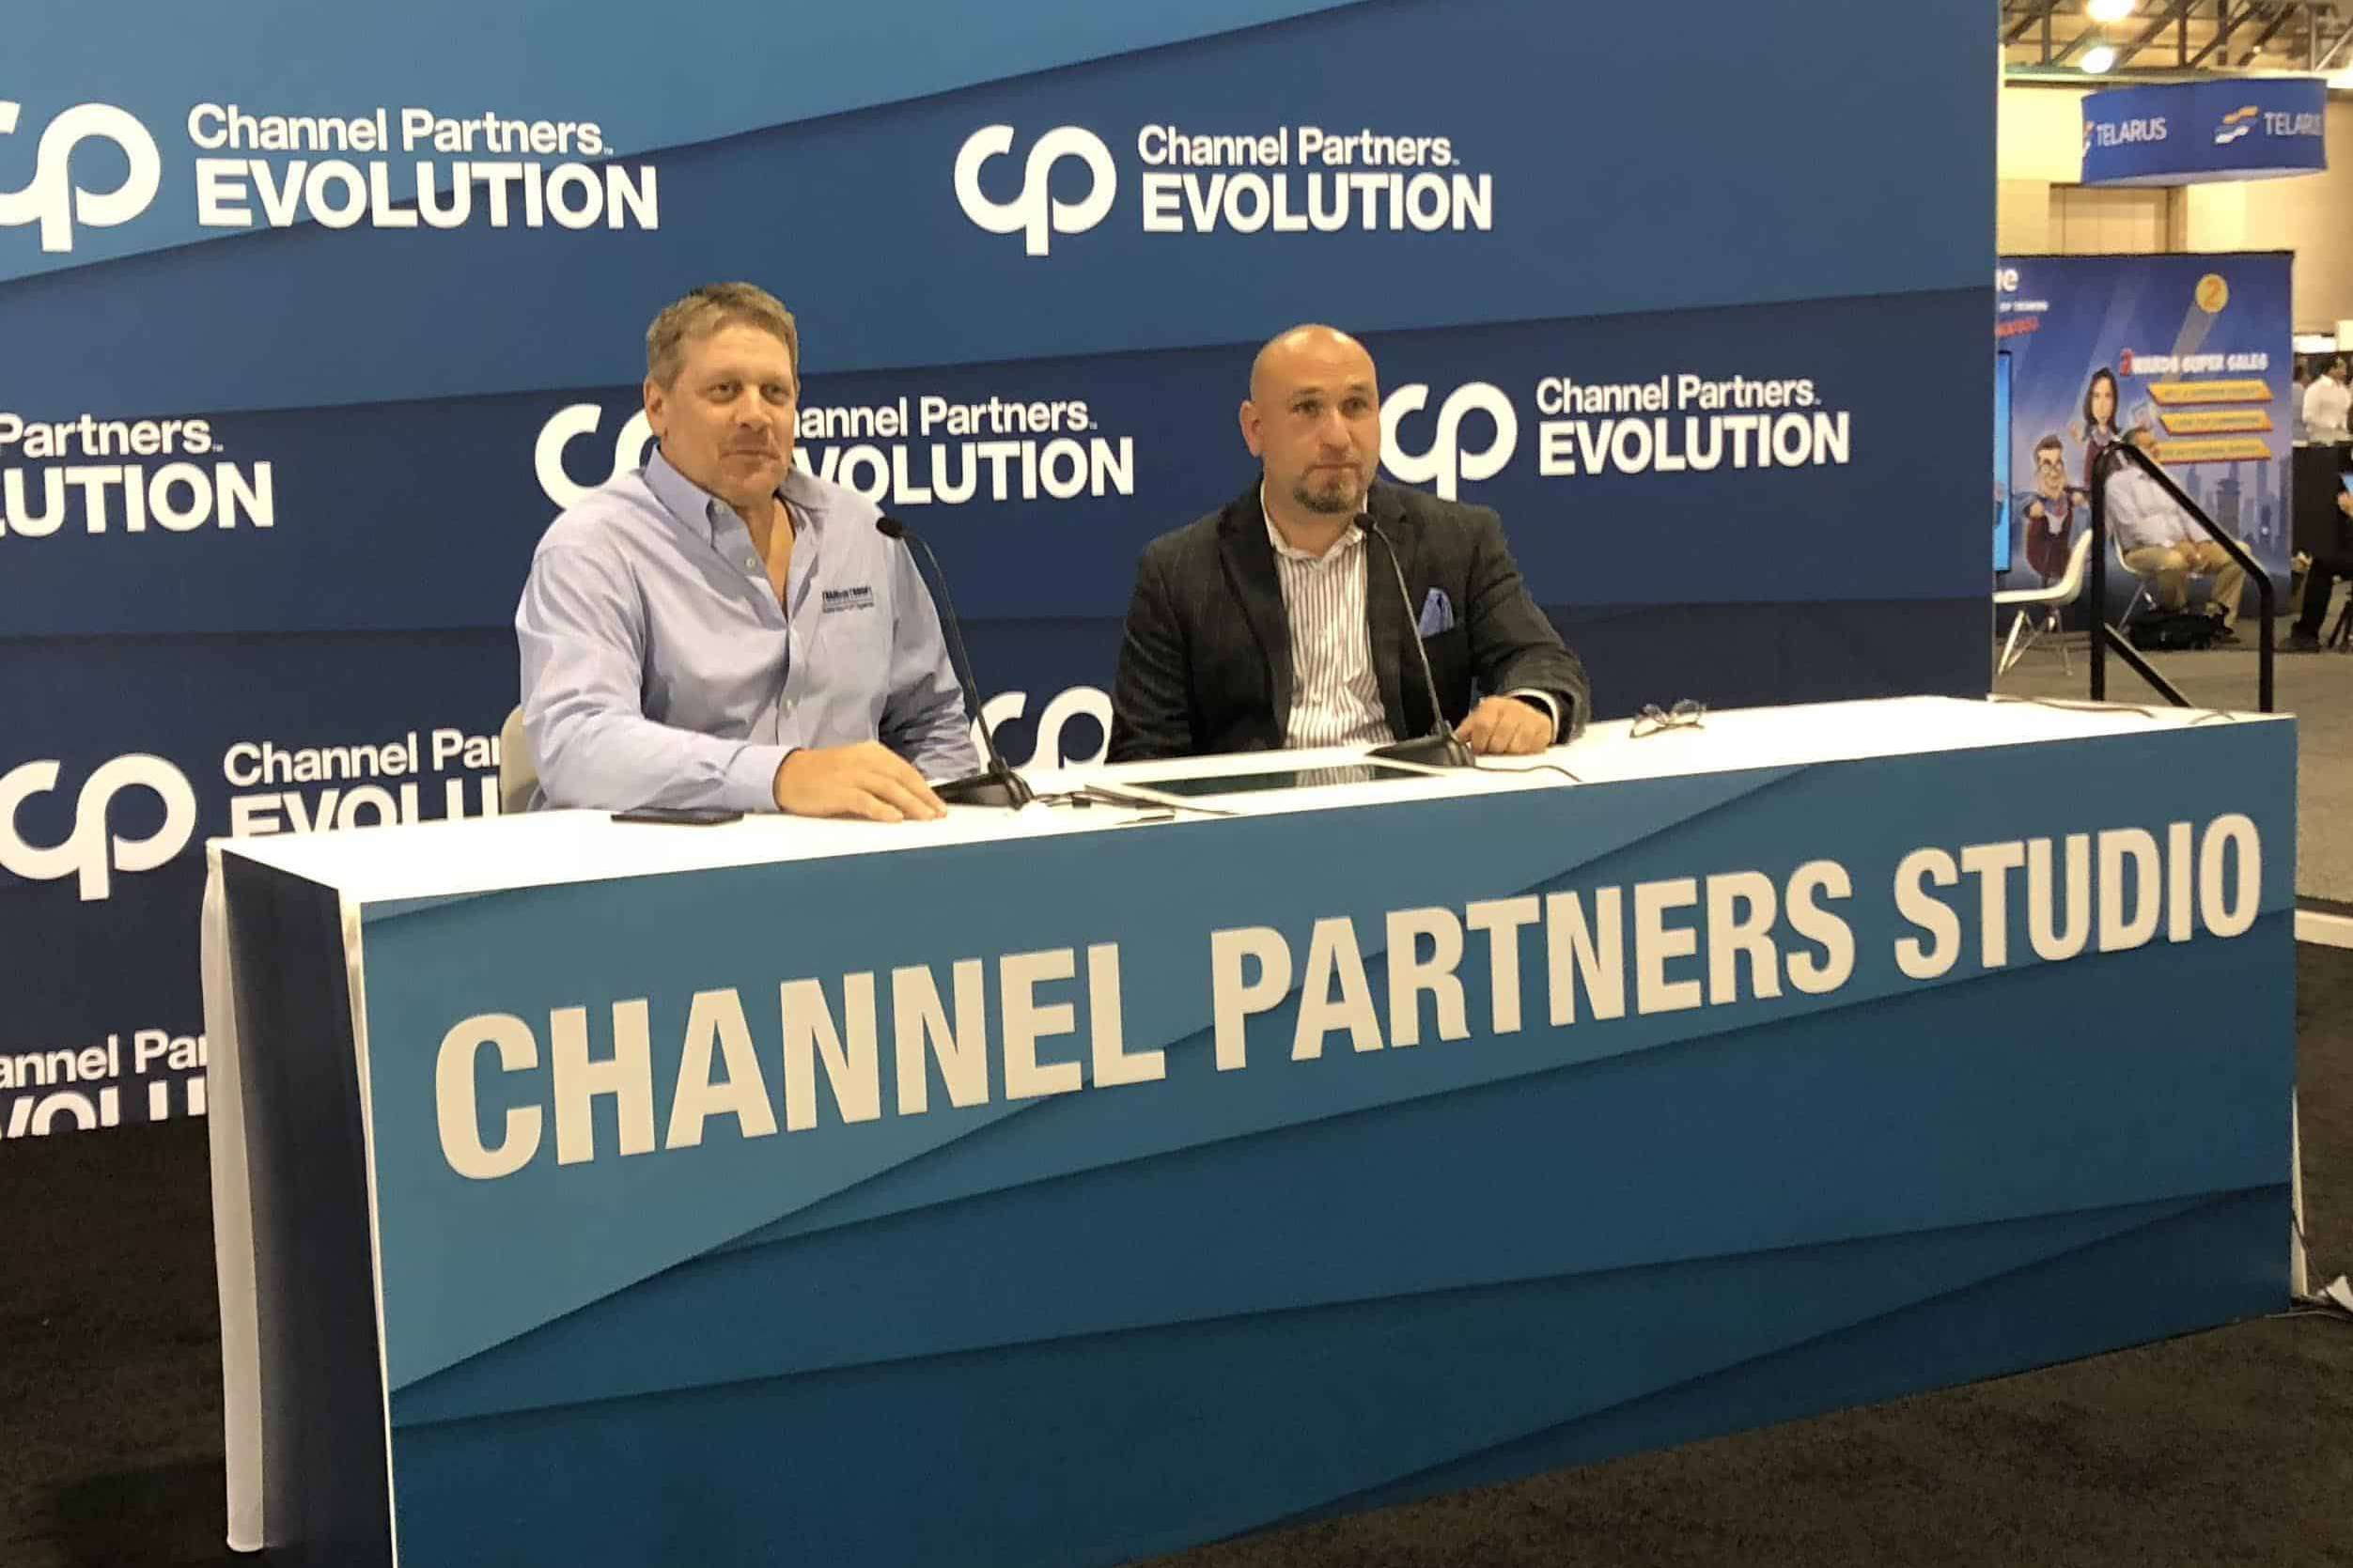 Two men presenting at Channel Partners Evolution studio booth